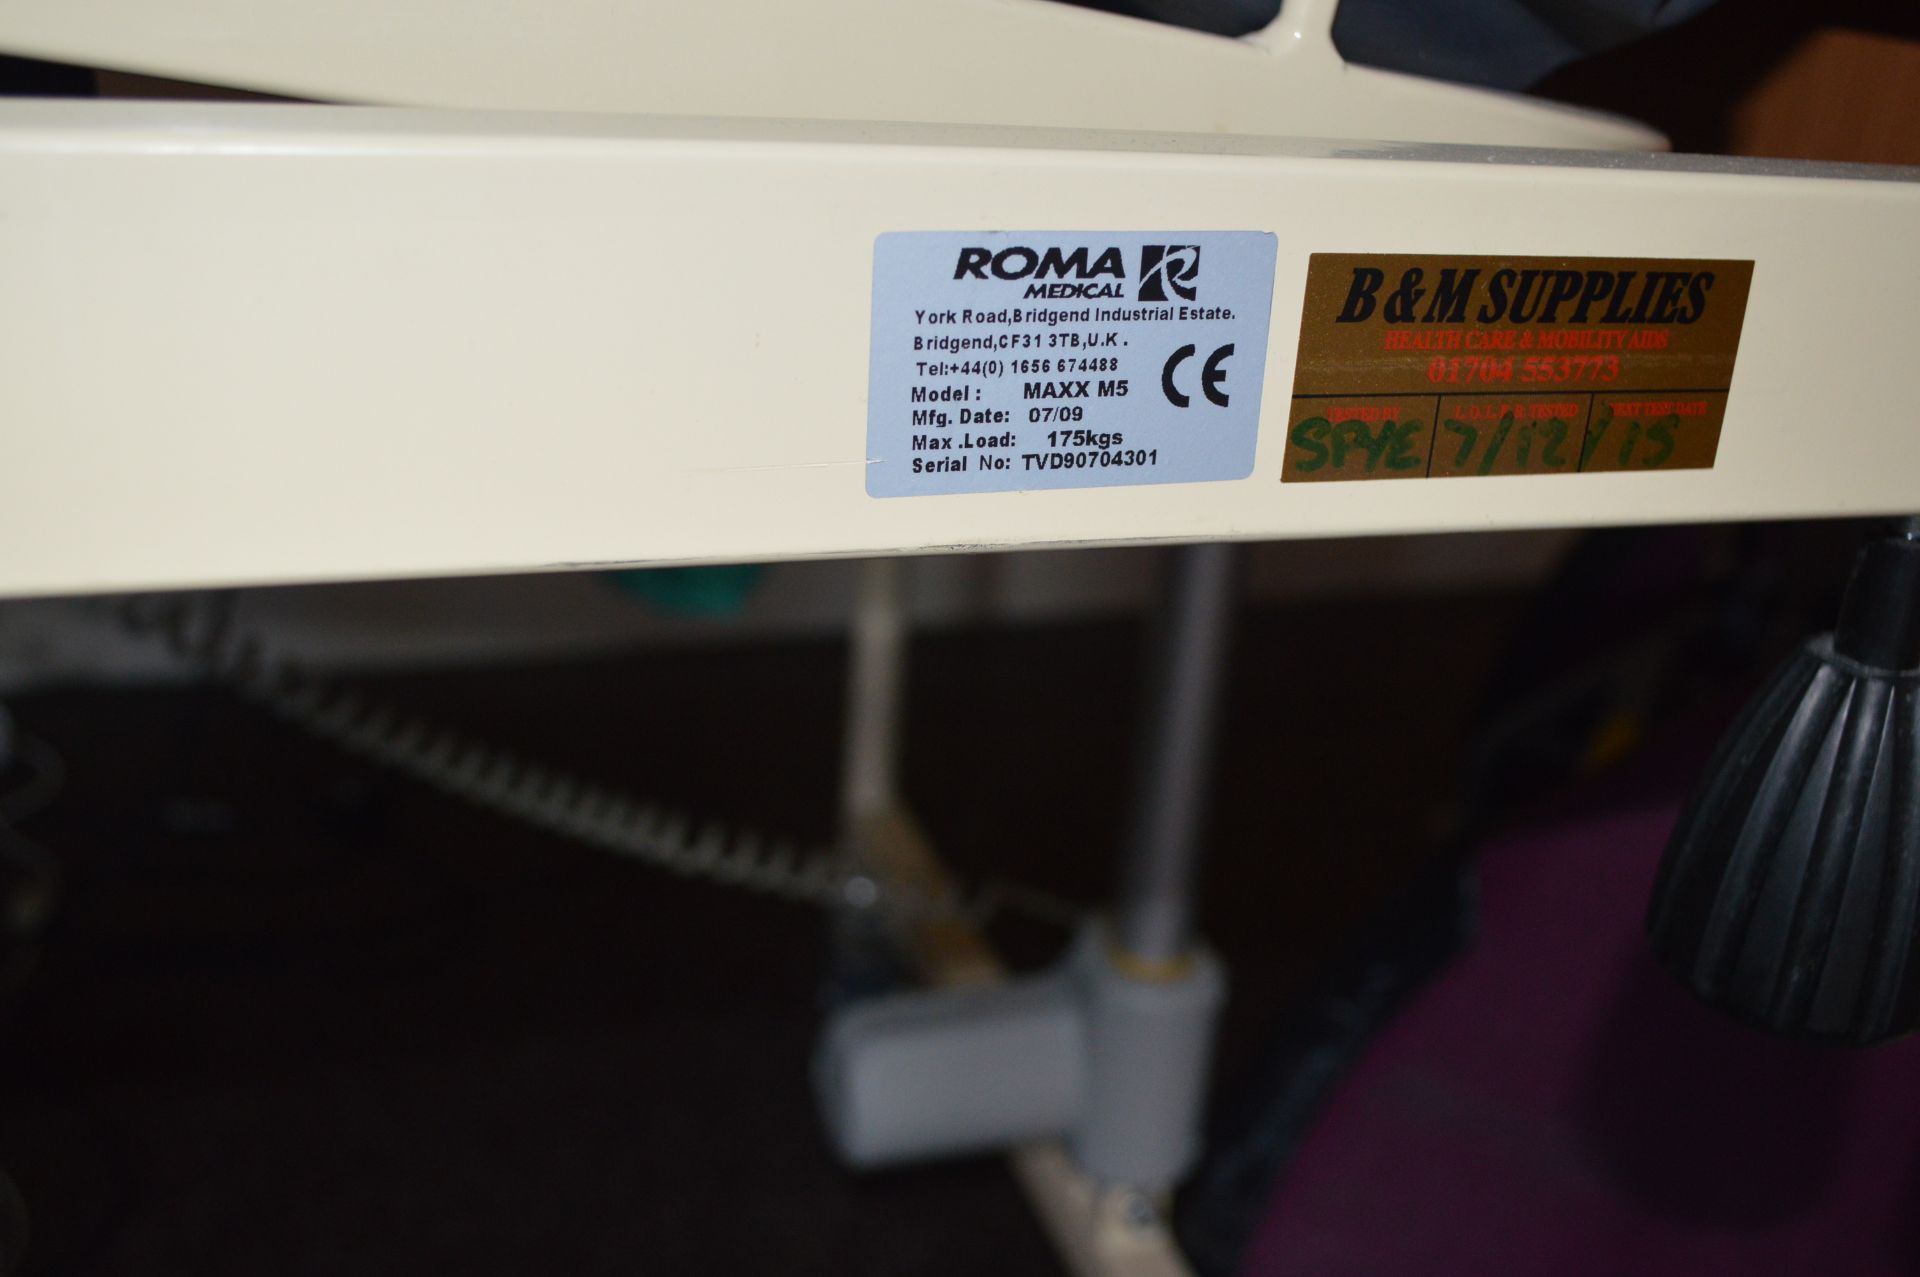 Roma Medical Model MAXX M5, Homecare Electric Adjustable bed, Max Lod 175Kg, (07/09) - Image 3 of 11